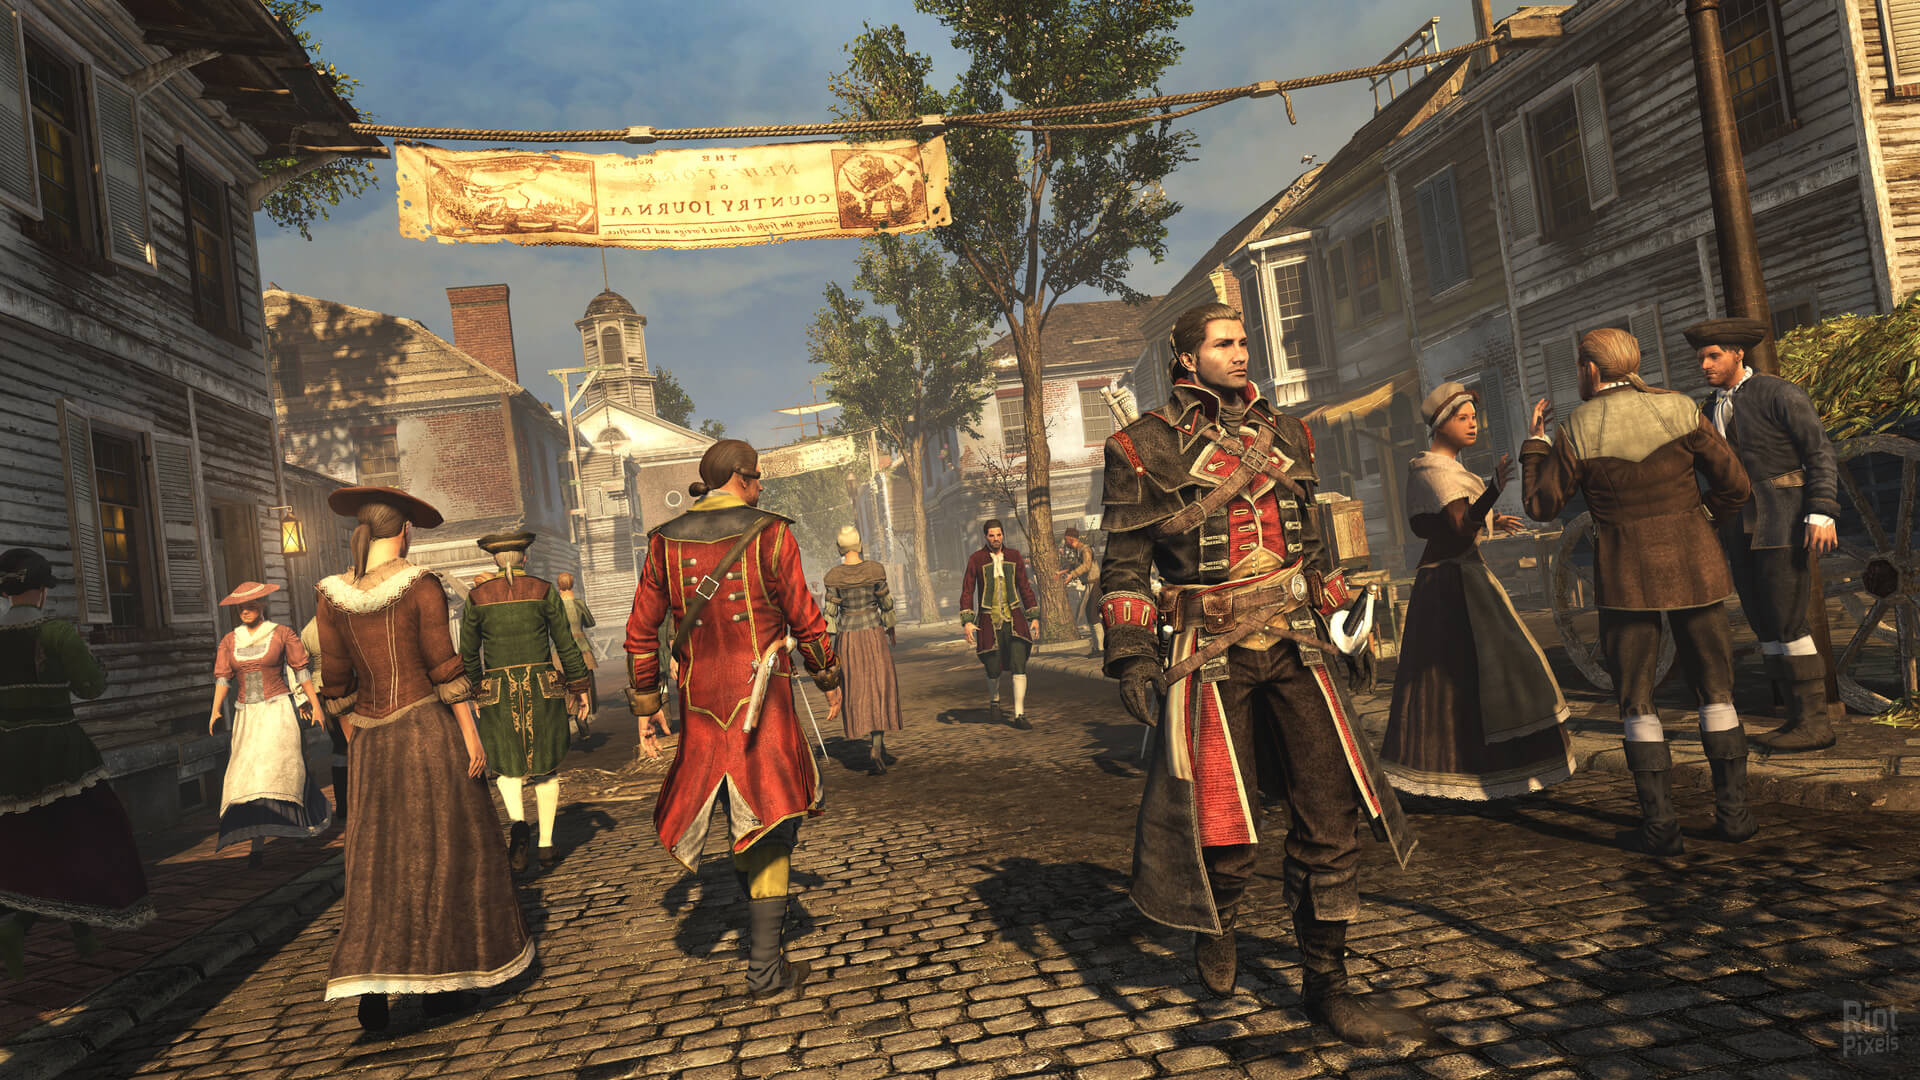 Download Assassin's Creed Rogue Full Game Highly Compressed For PC in 500 MB Parts - TraX Gaming Center